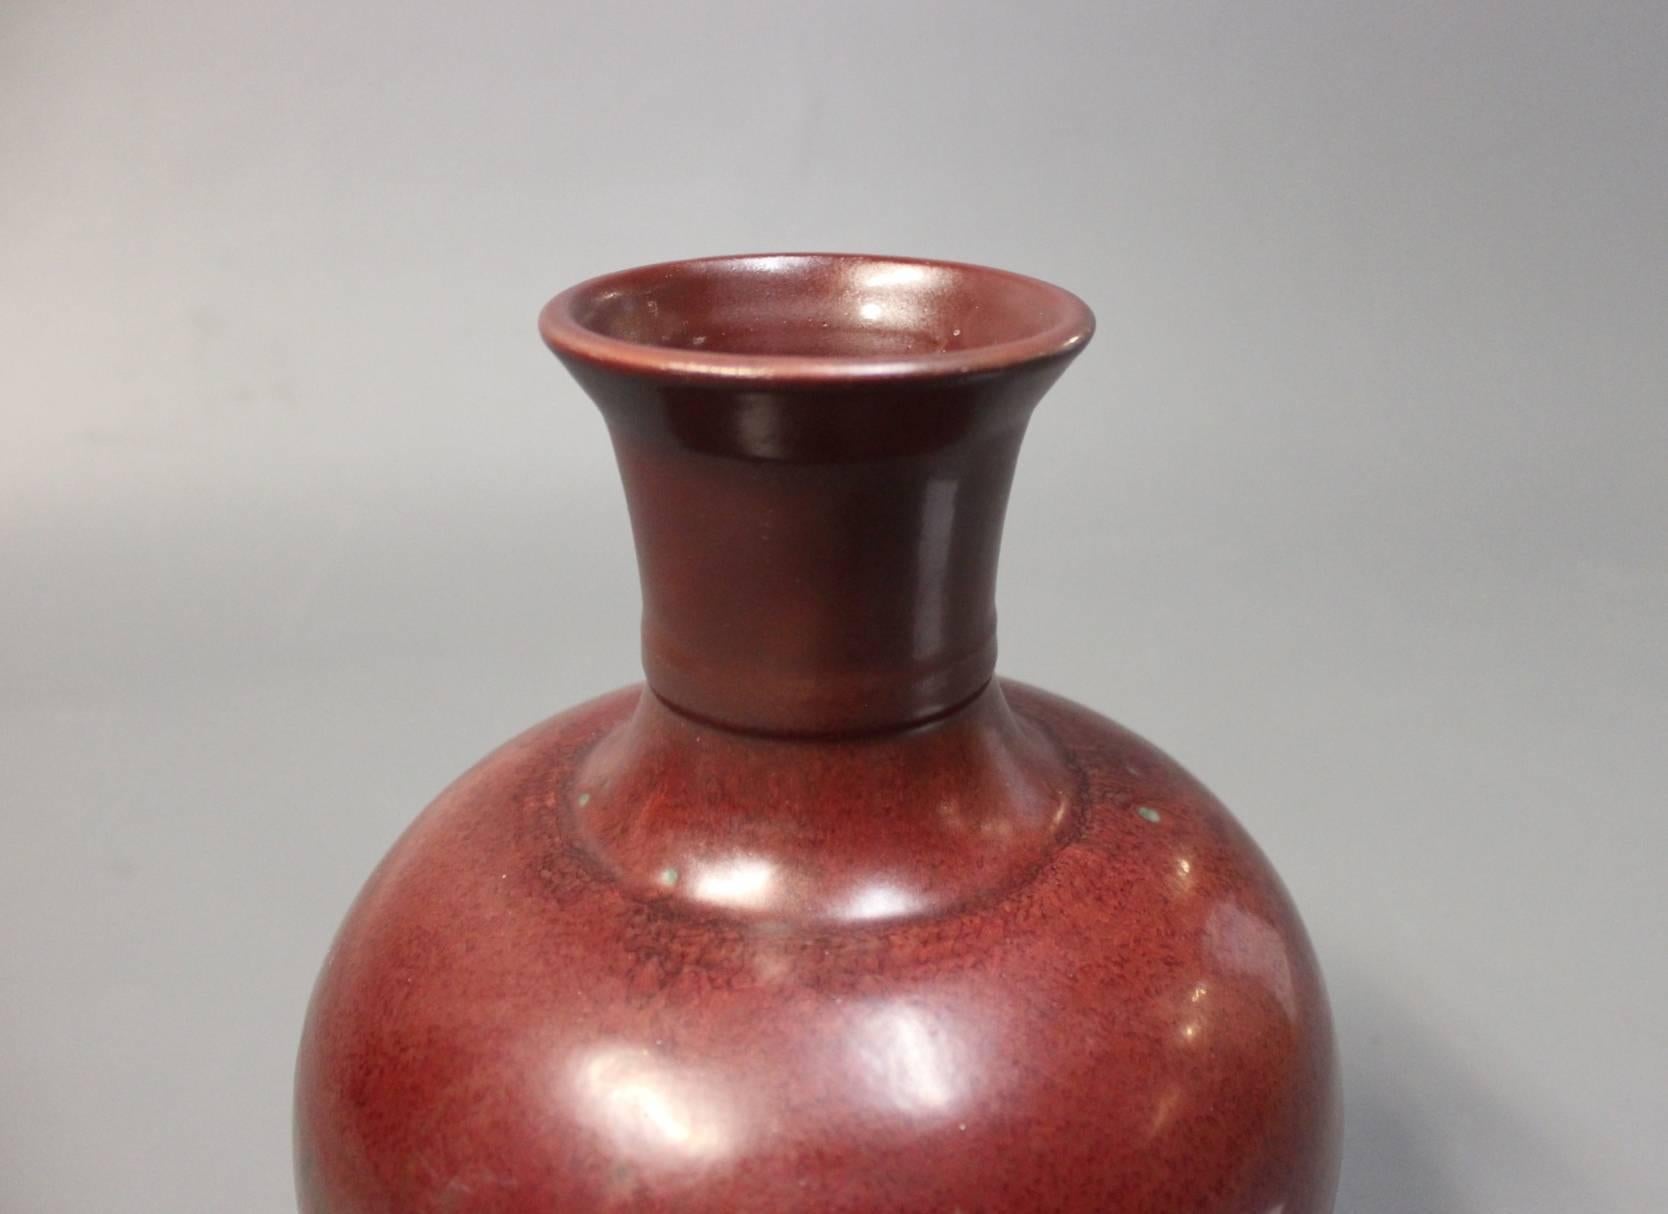 Large oxblood colored in glazed stoneware. Manufactured by Royal Copenhagen and designed by Carl Halier in 1937.